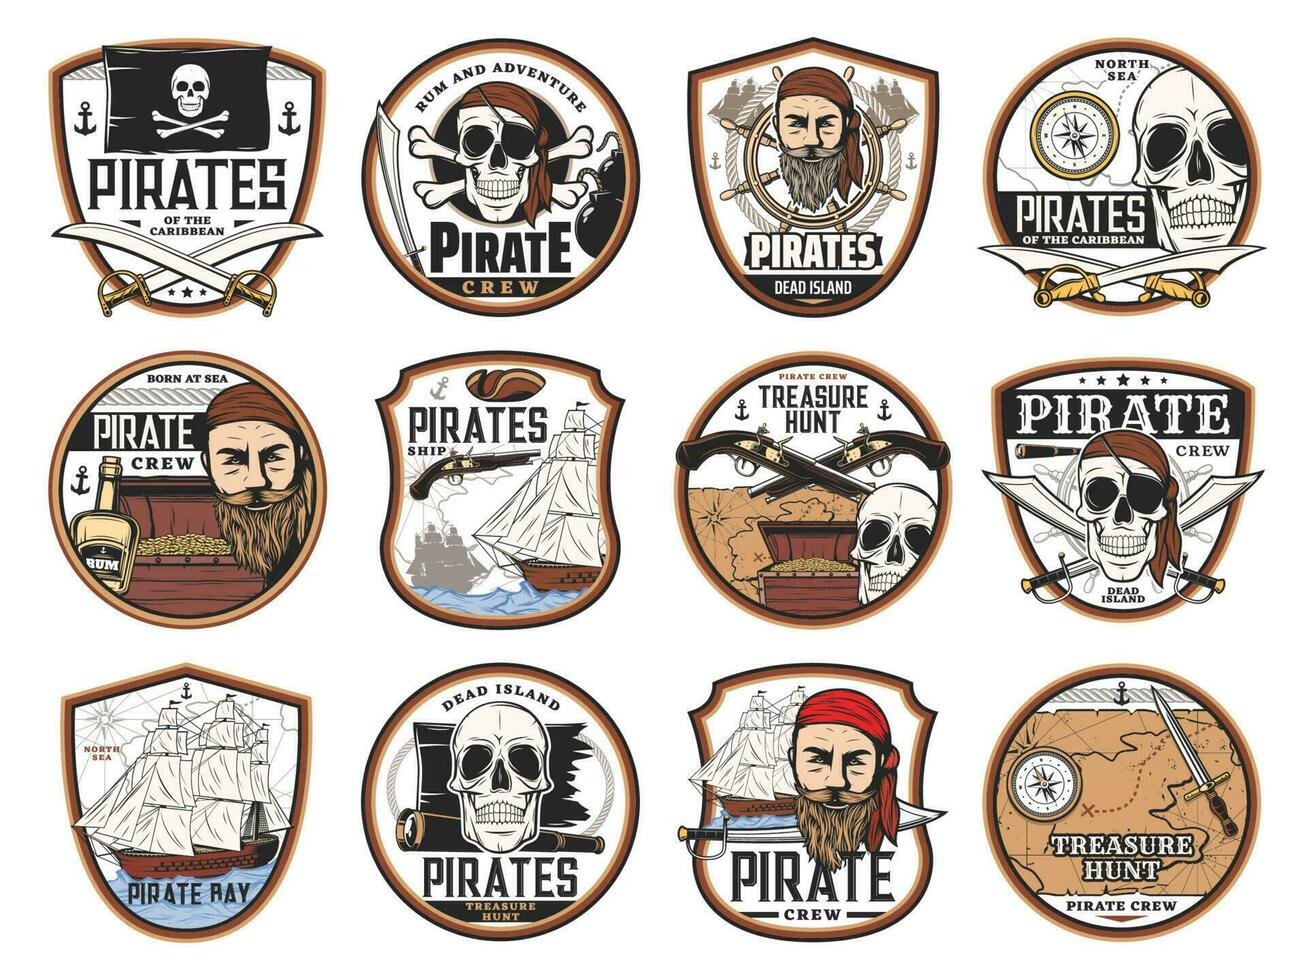 Pirate and corsair icons, skulls, captains, ships vector